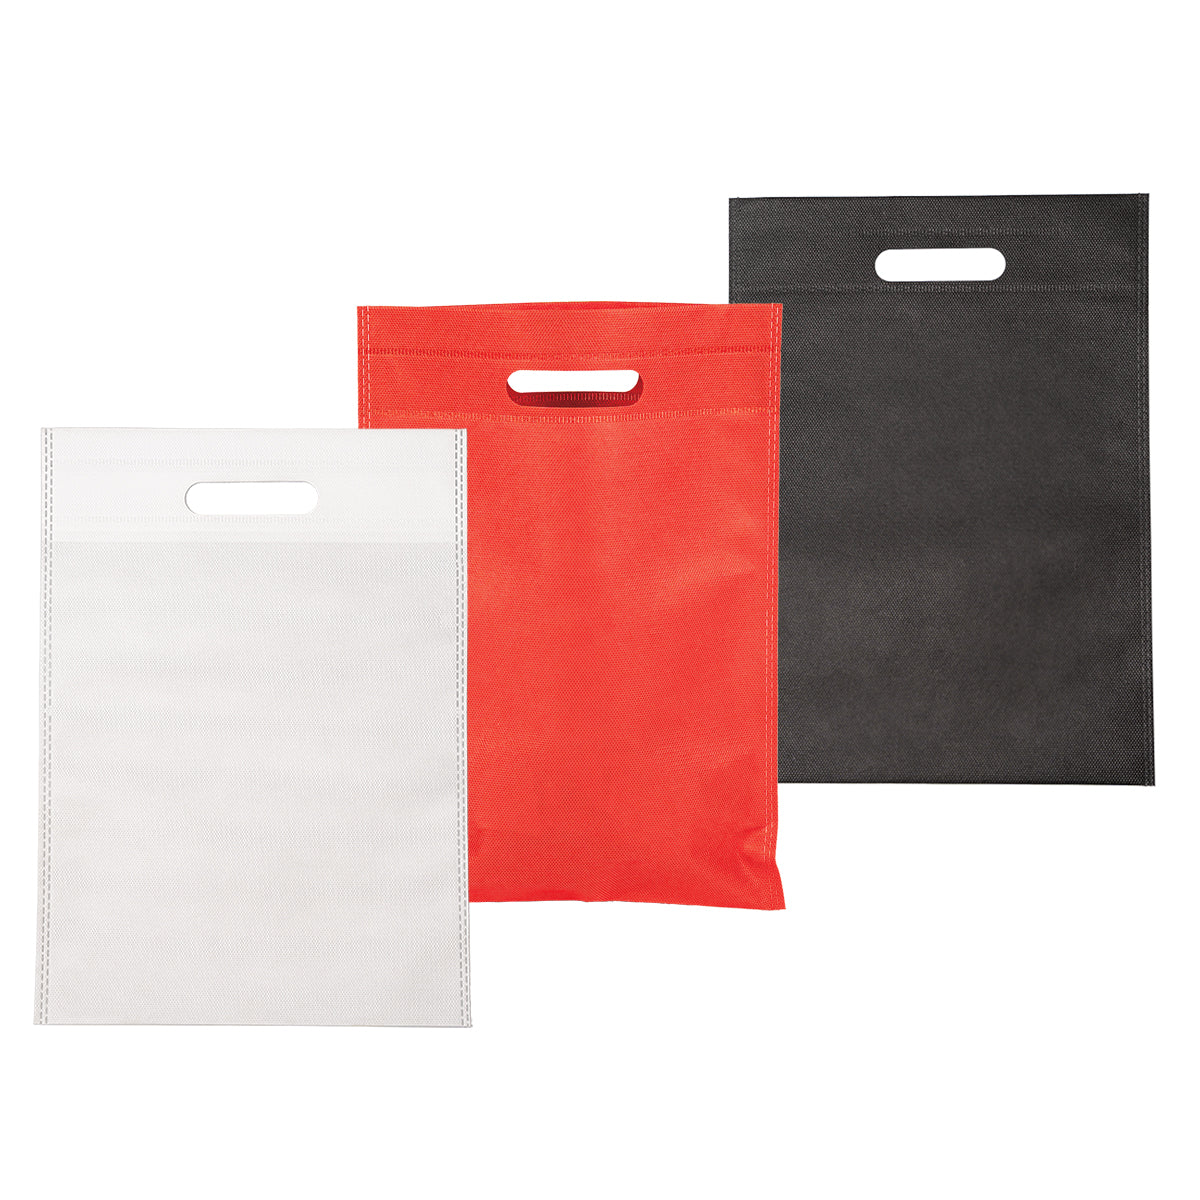 Wholesale Totally Trim Paper Shopping Bags